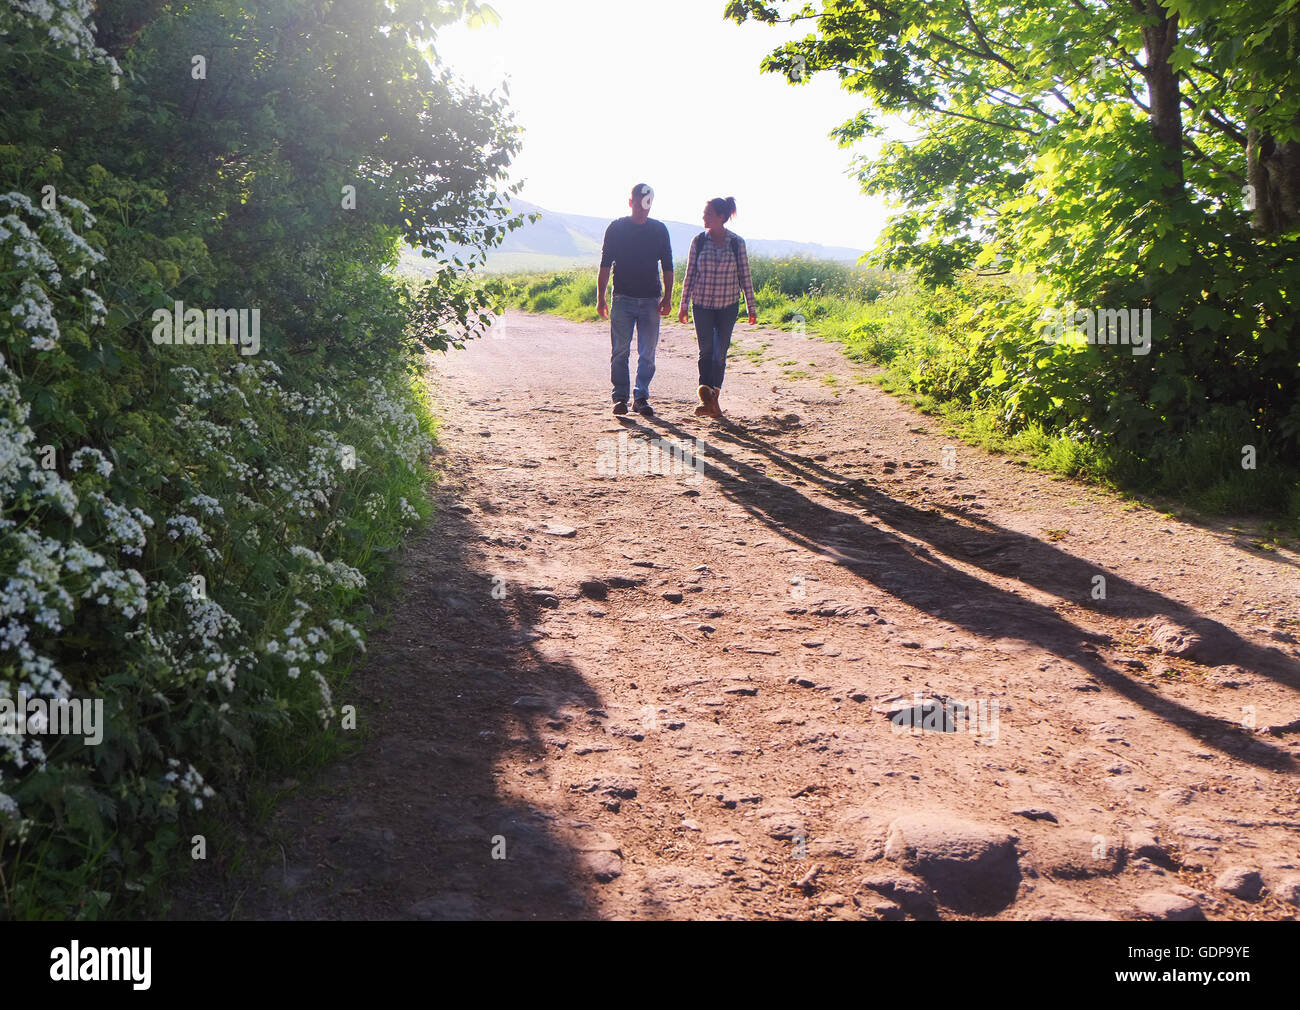 Rear view of couple walking on dirt track Stock Photo